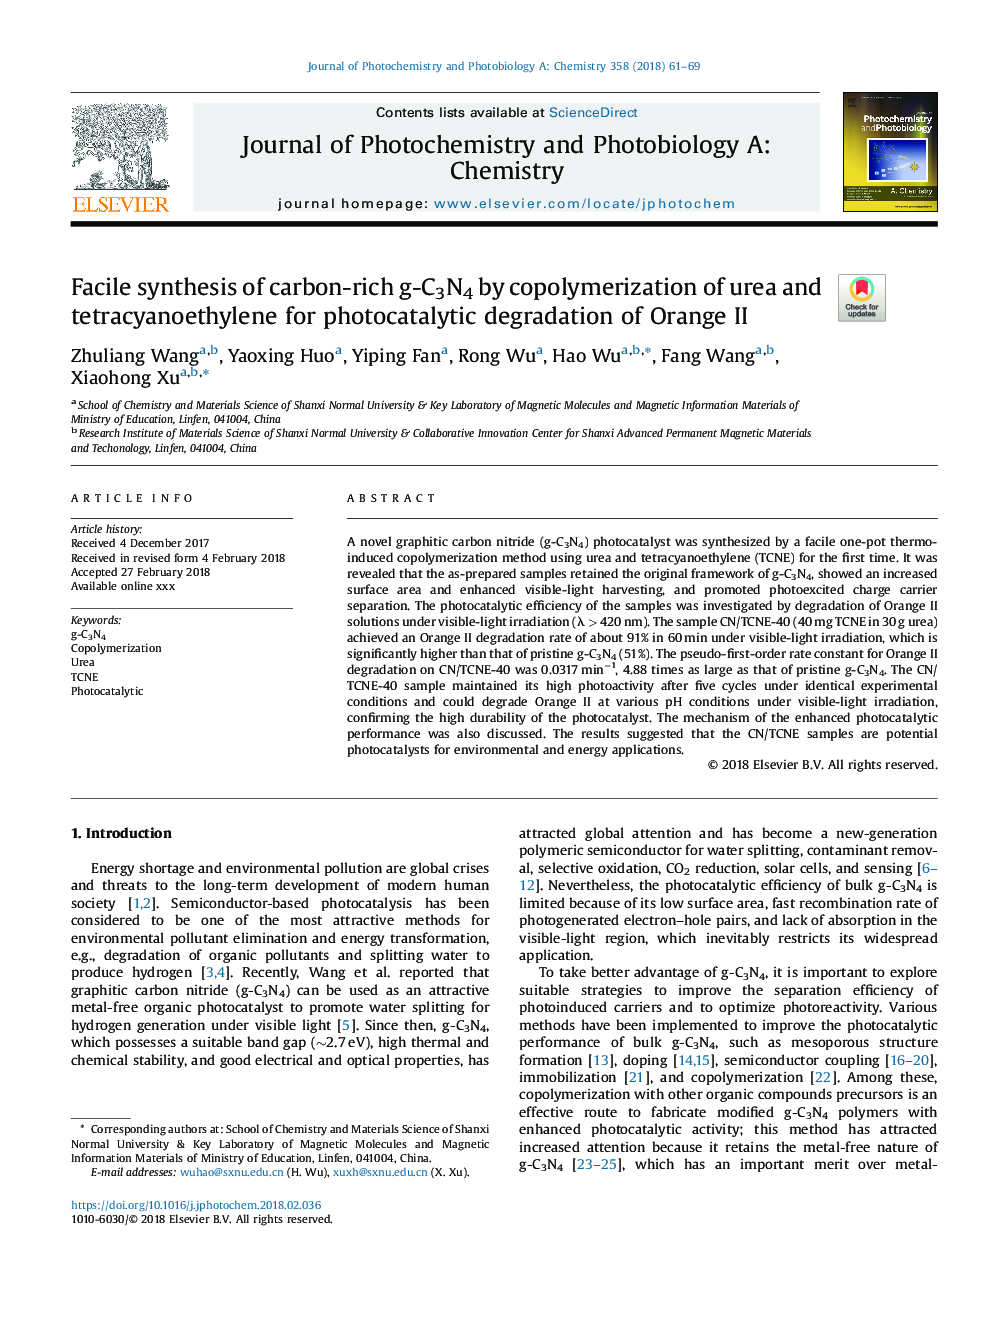 Facile synthesis of carbon-rich g-C3N4 by copolymerization of urea and tetracyanoethylene for photocatalytic degradation of Orange II